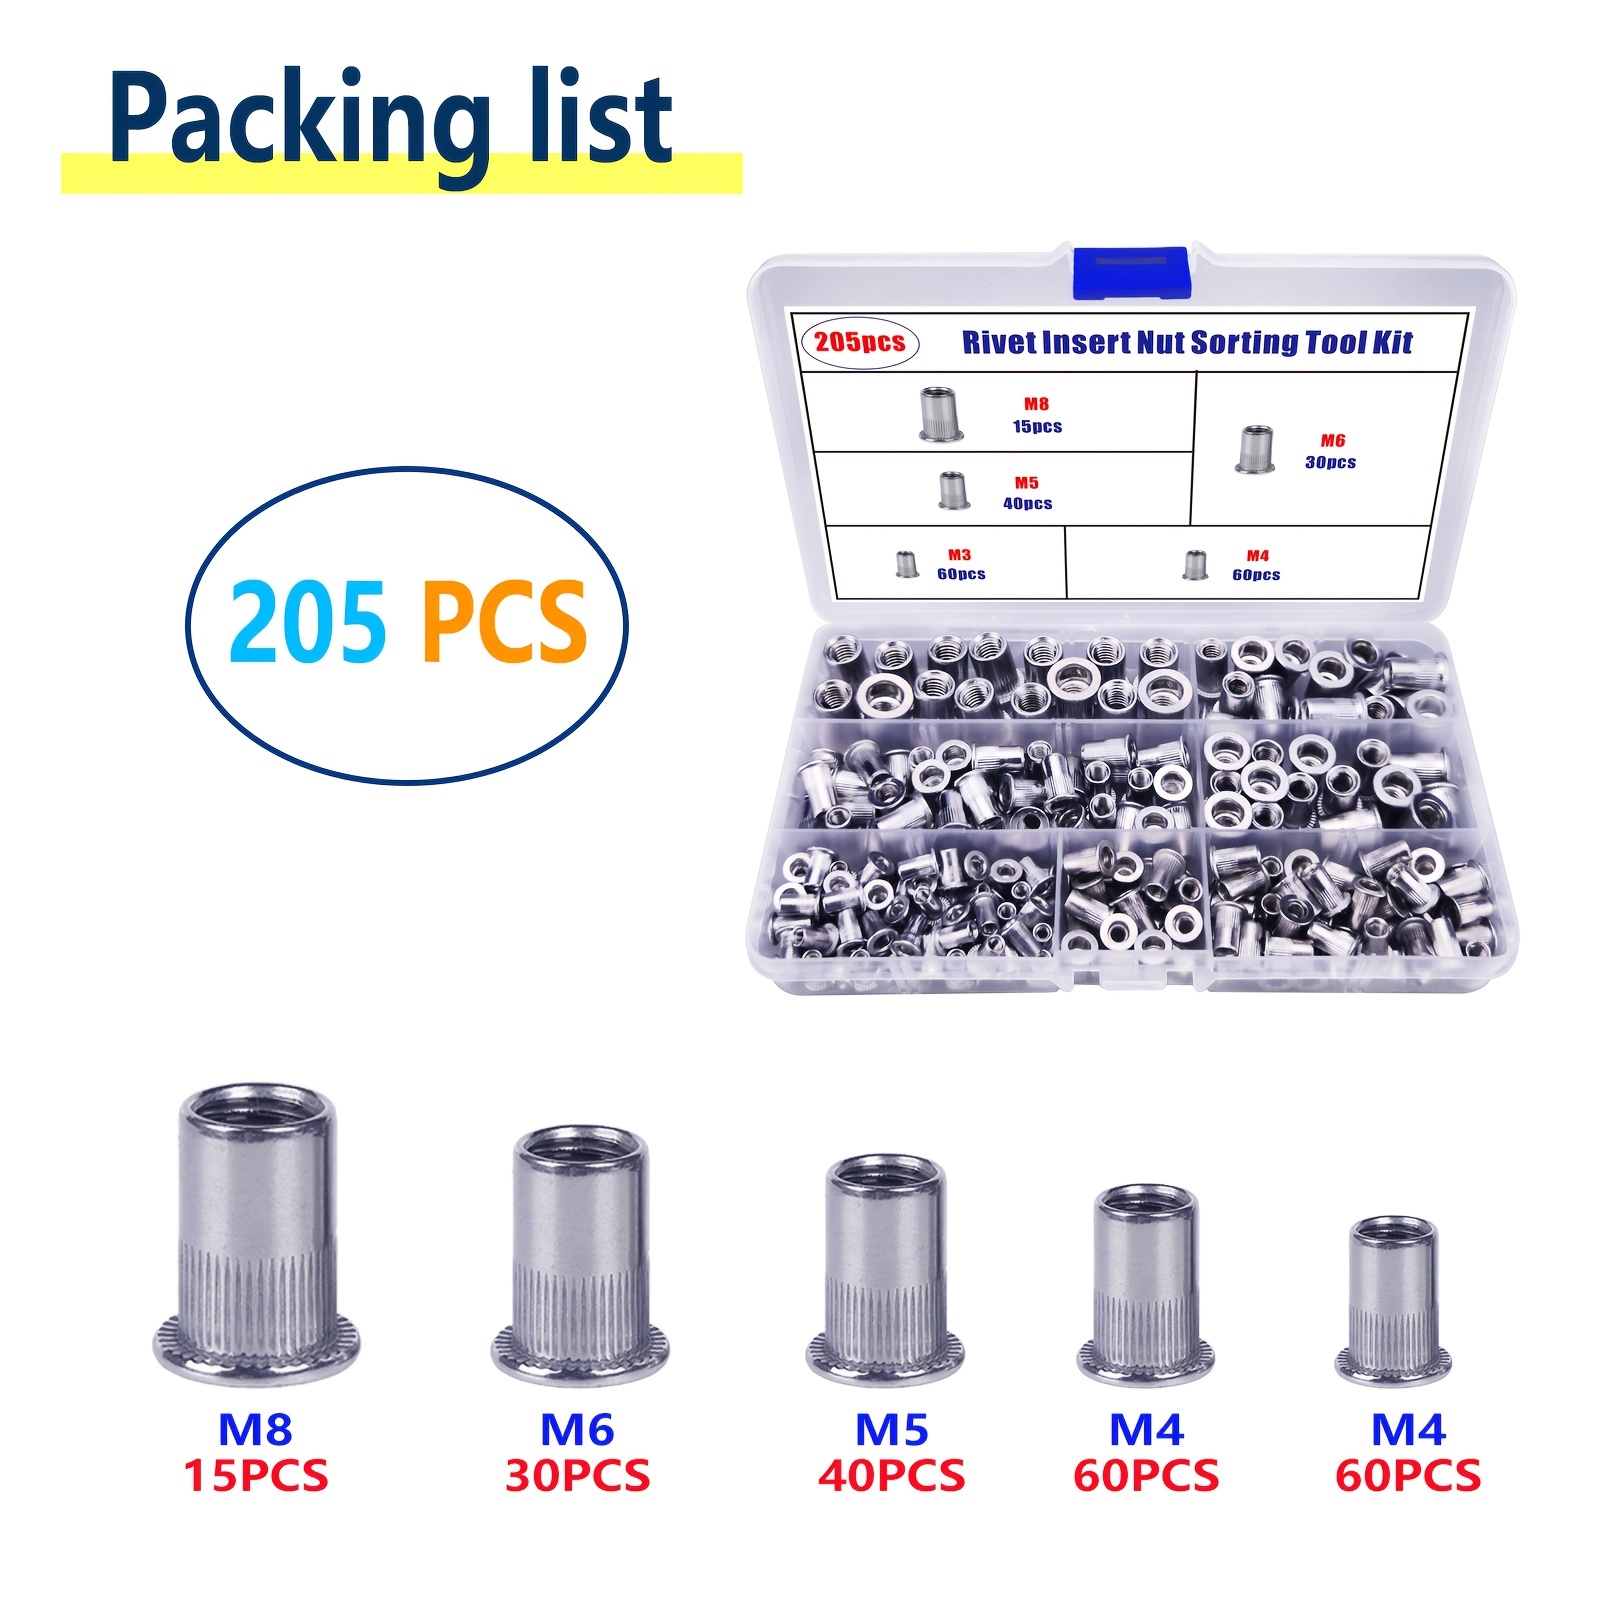 

205pcs Rivet Nut Sorting Tool Kit, Aluminum Knurled Body Flat Head Threaded Insert Nuts, Suitable For Sheet Metal Assembly, Furniture Repair, Automotive Industry, Home Decoration